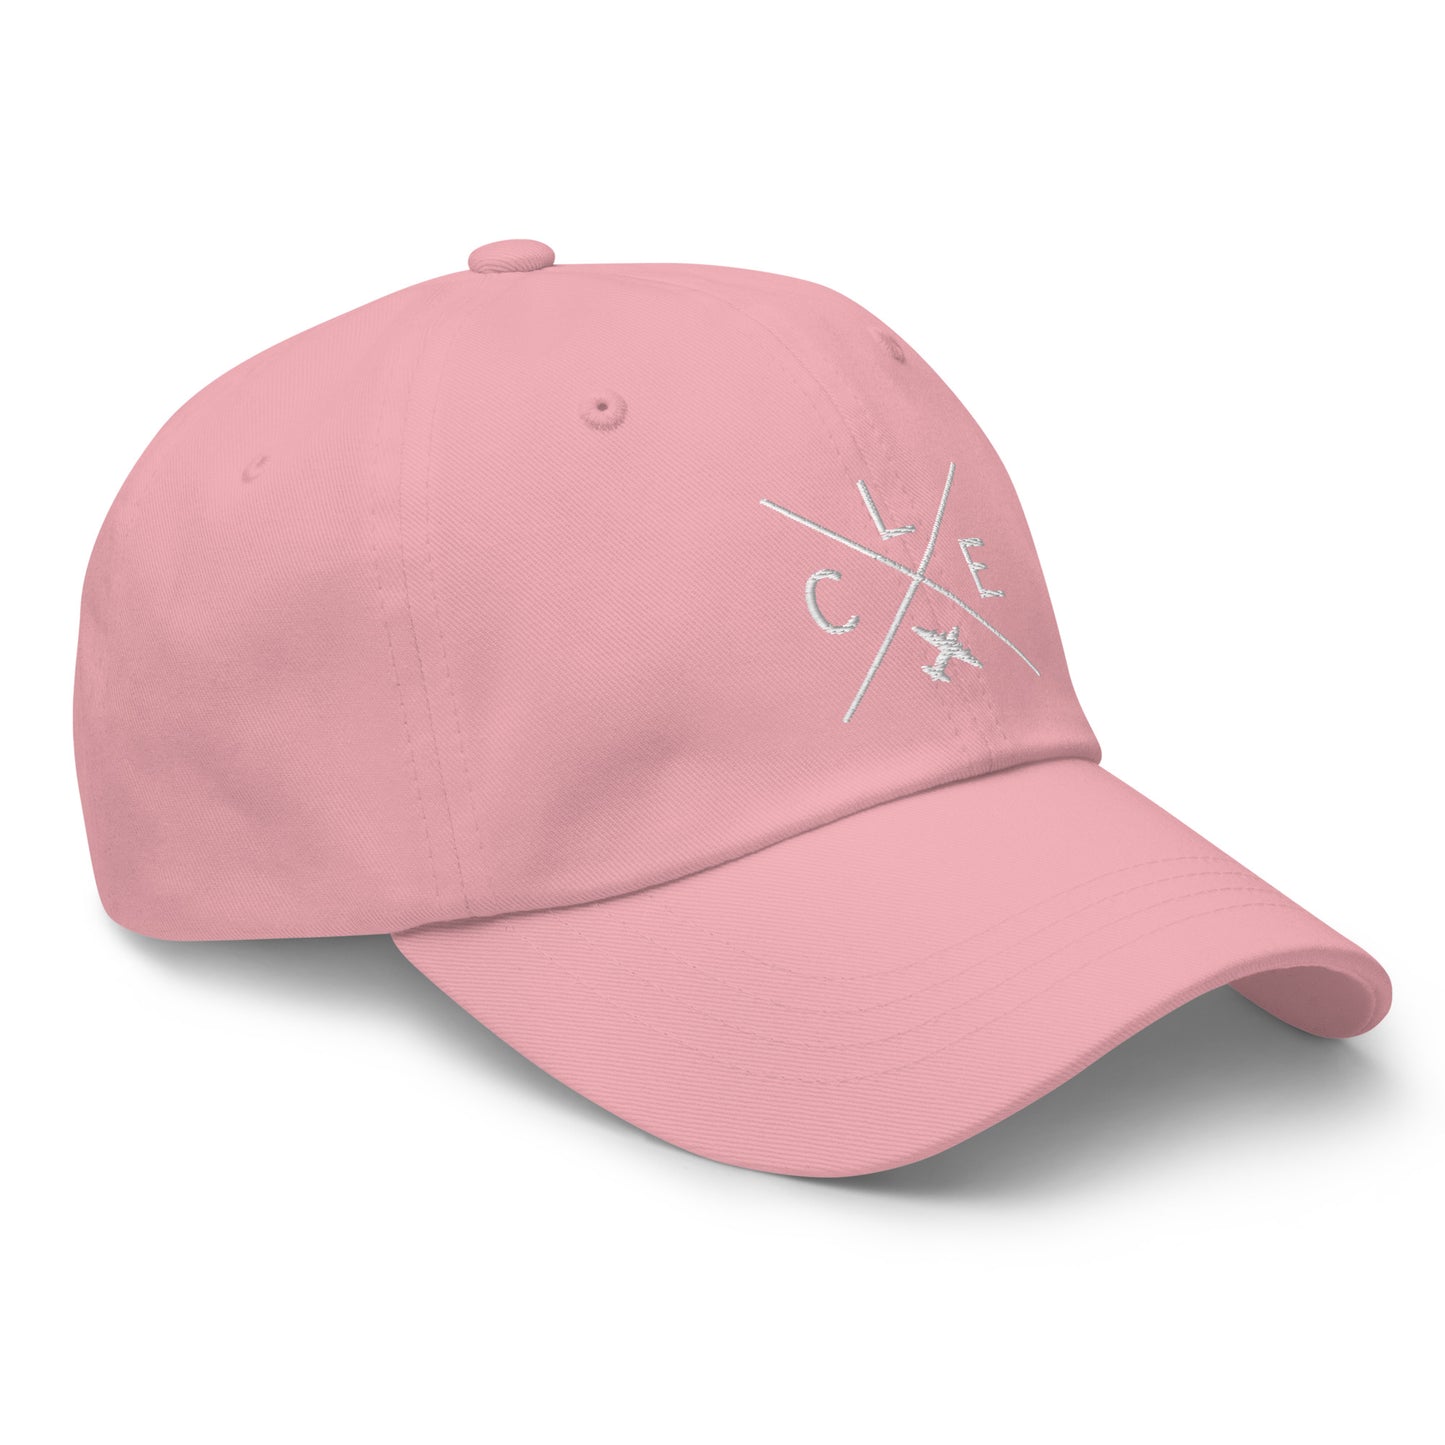 Crossed-X Dad Hat - White • CLE Cleveland • YHM Designs - Image 26